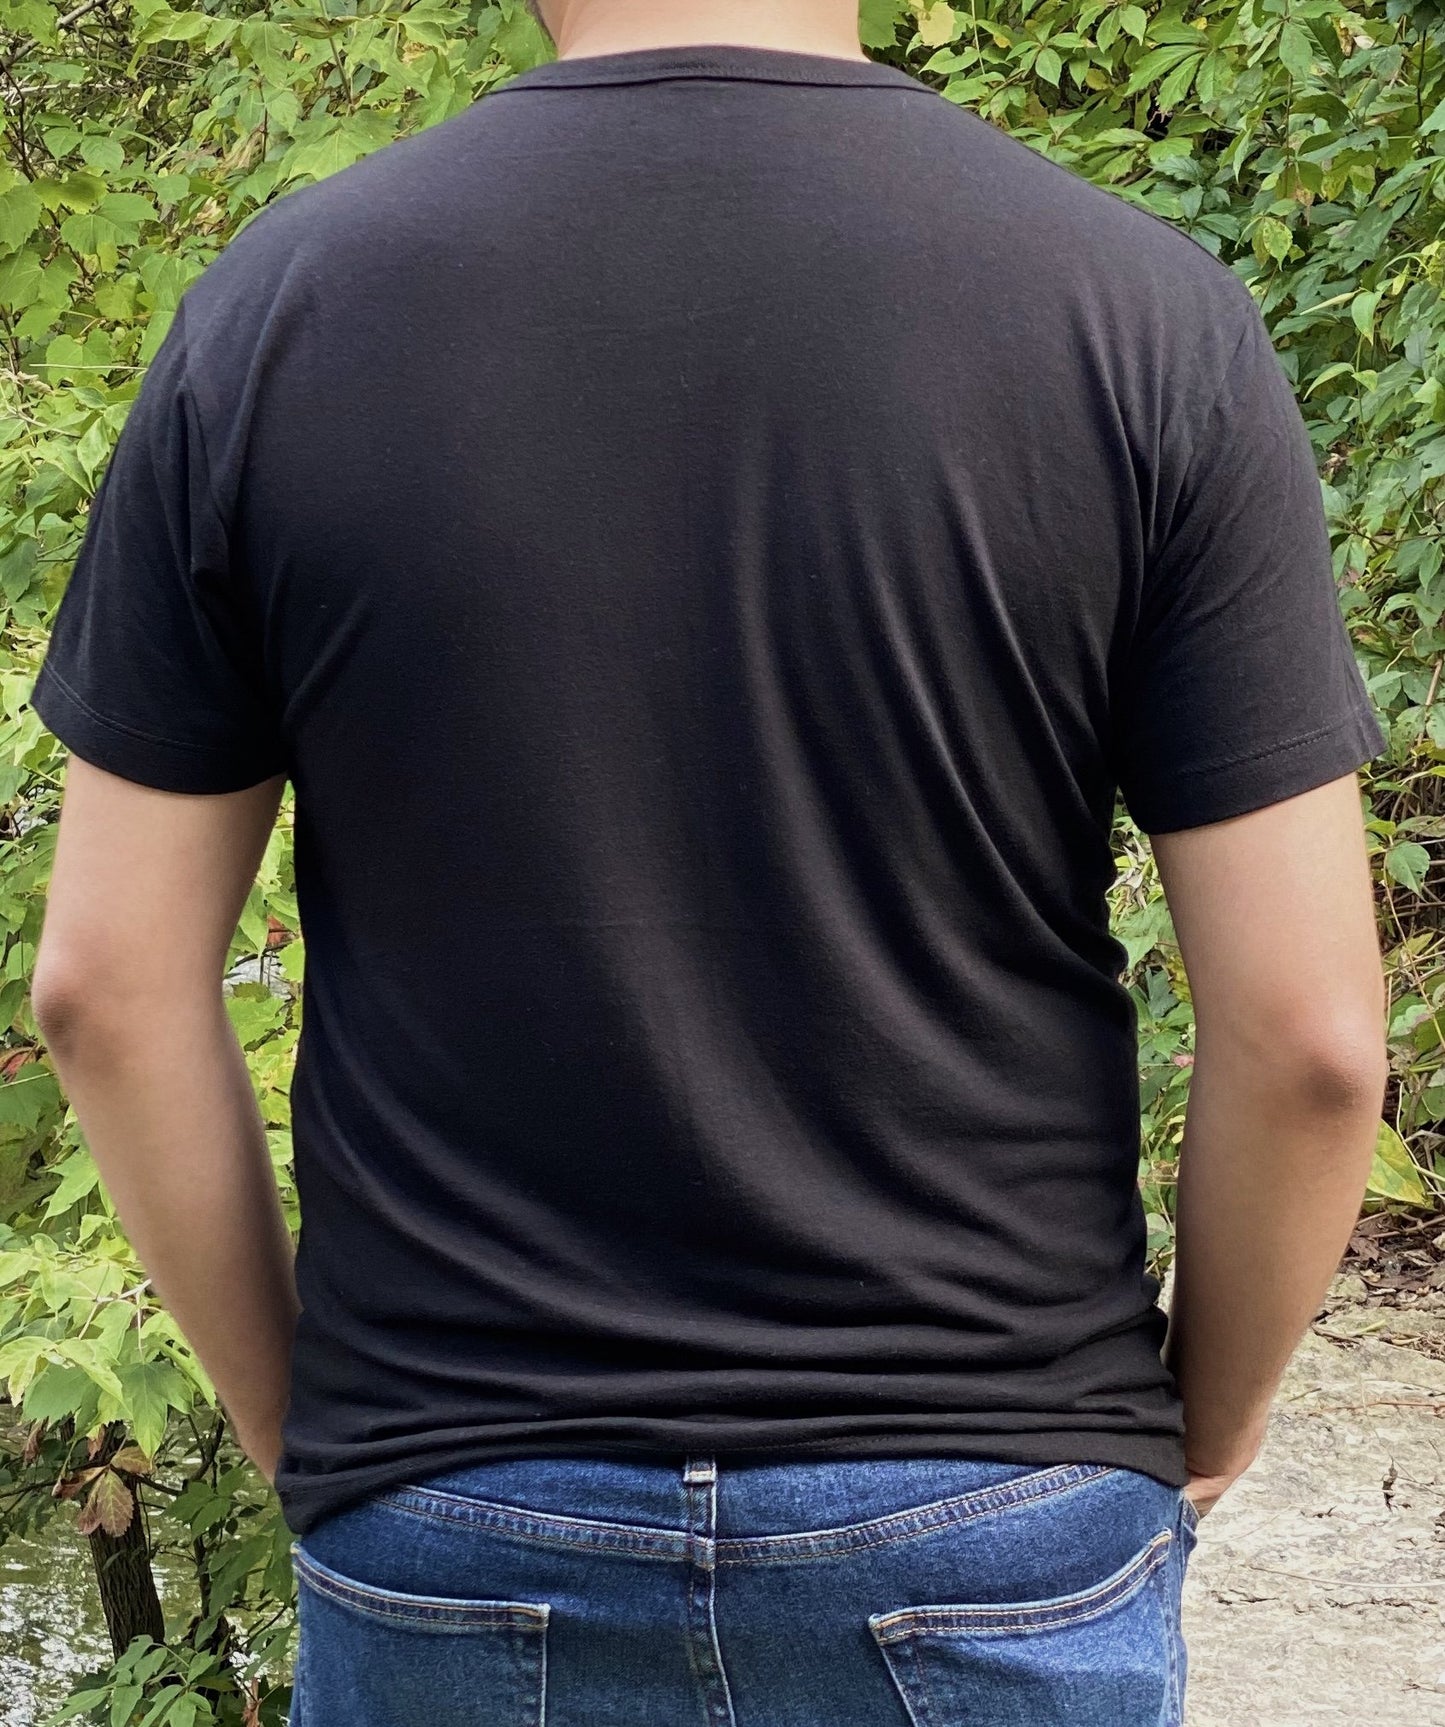 Back view of black bamboo unisex t-shirt on a man